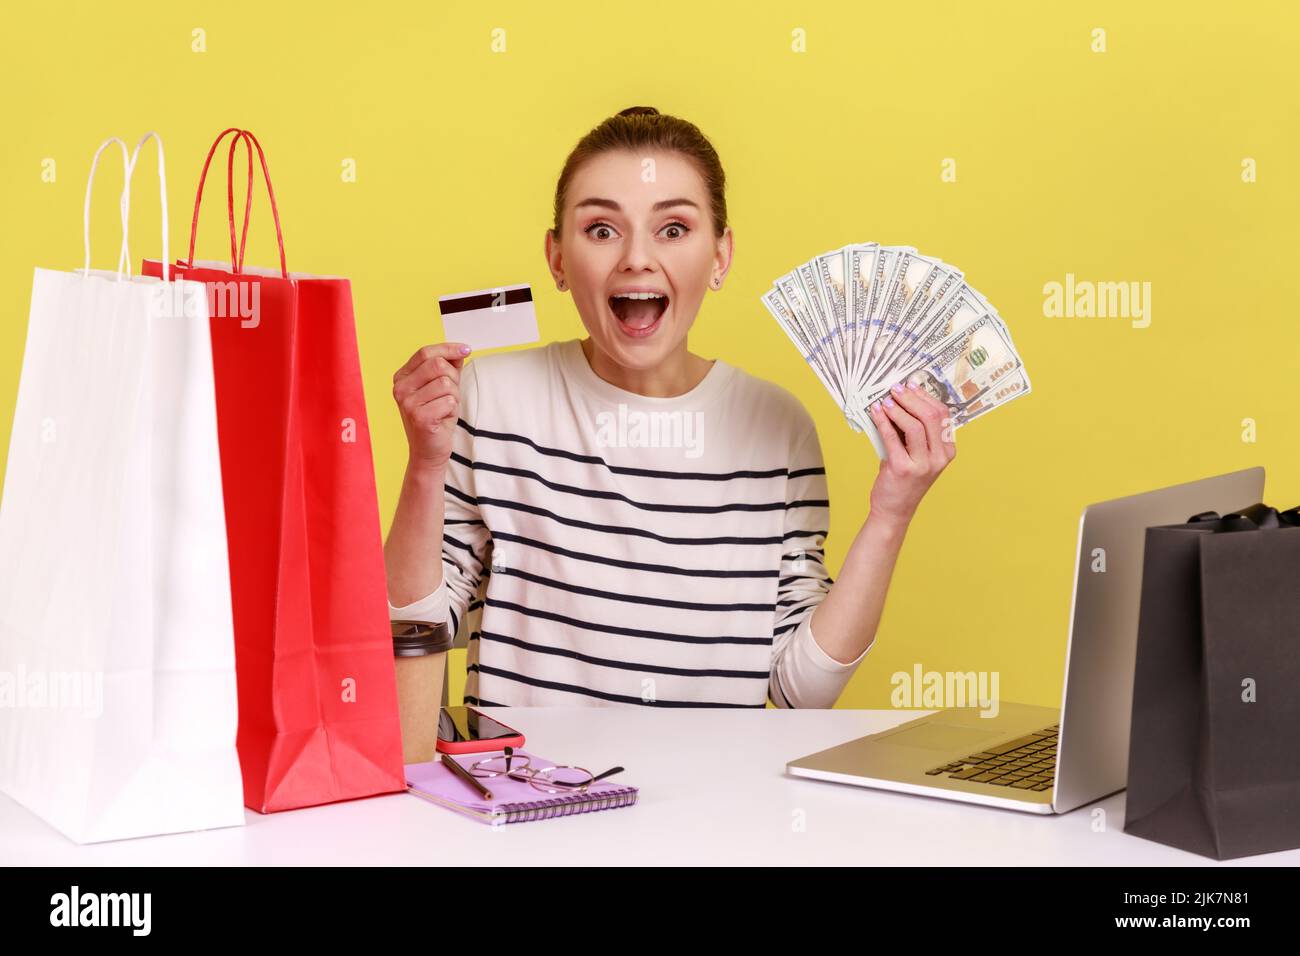 Bank loan, electronic money. Amazed woman sitting office workplace with laptop, holding dollars and credit card, looking at camera with smile. Indoor studio studio shot isolated on yellow background. Stock Photo